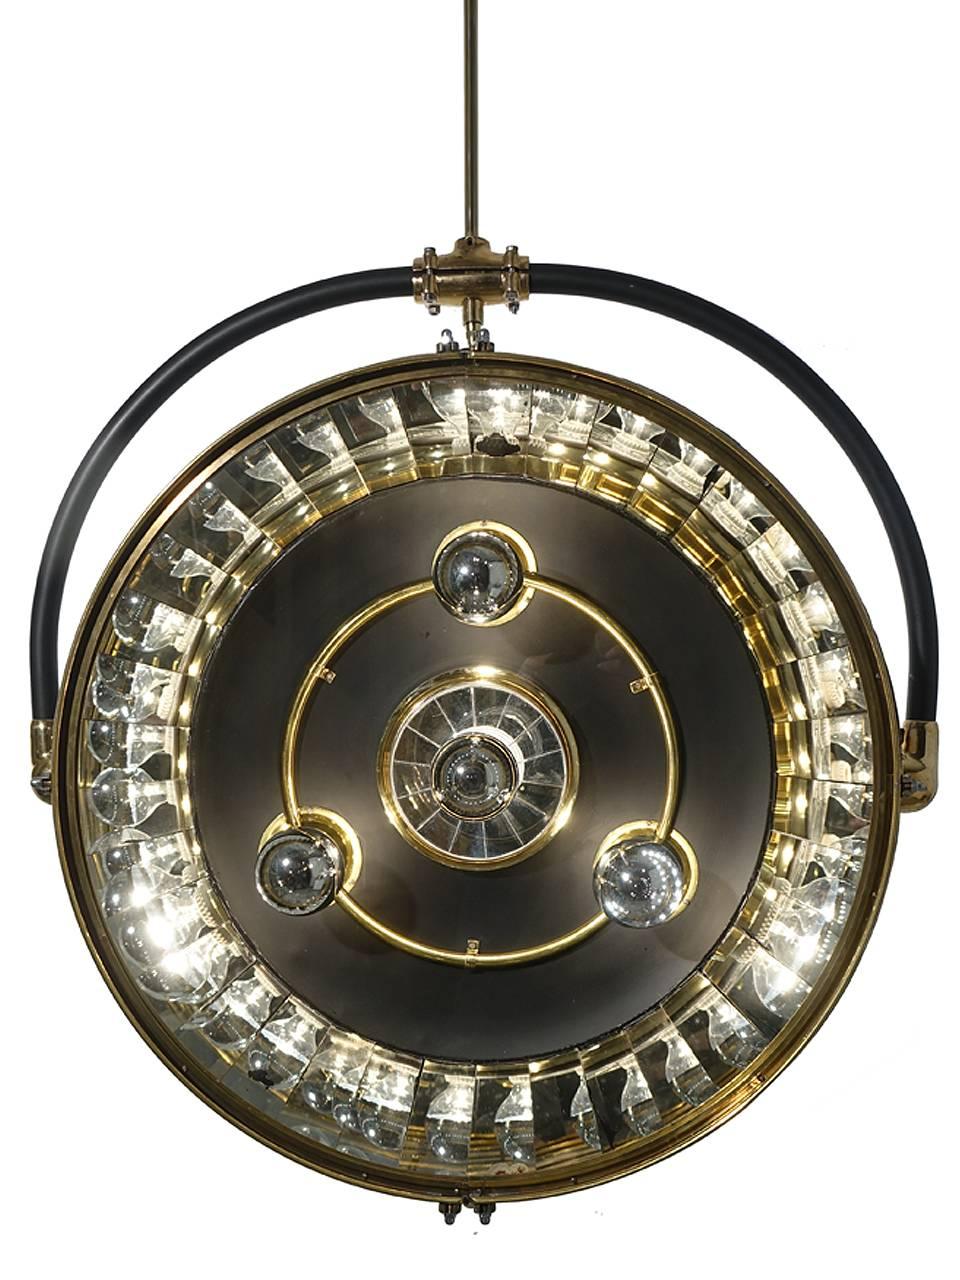 These rare French Scialytique operating room lamps are very difficult to find. We're always looking and were lucky to find this perfect example. The one pictured above is a large showy chandelier with an impressive 27 inch diameter. There are almost